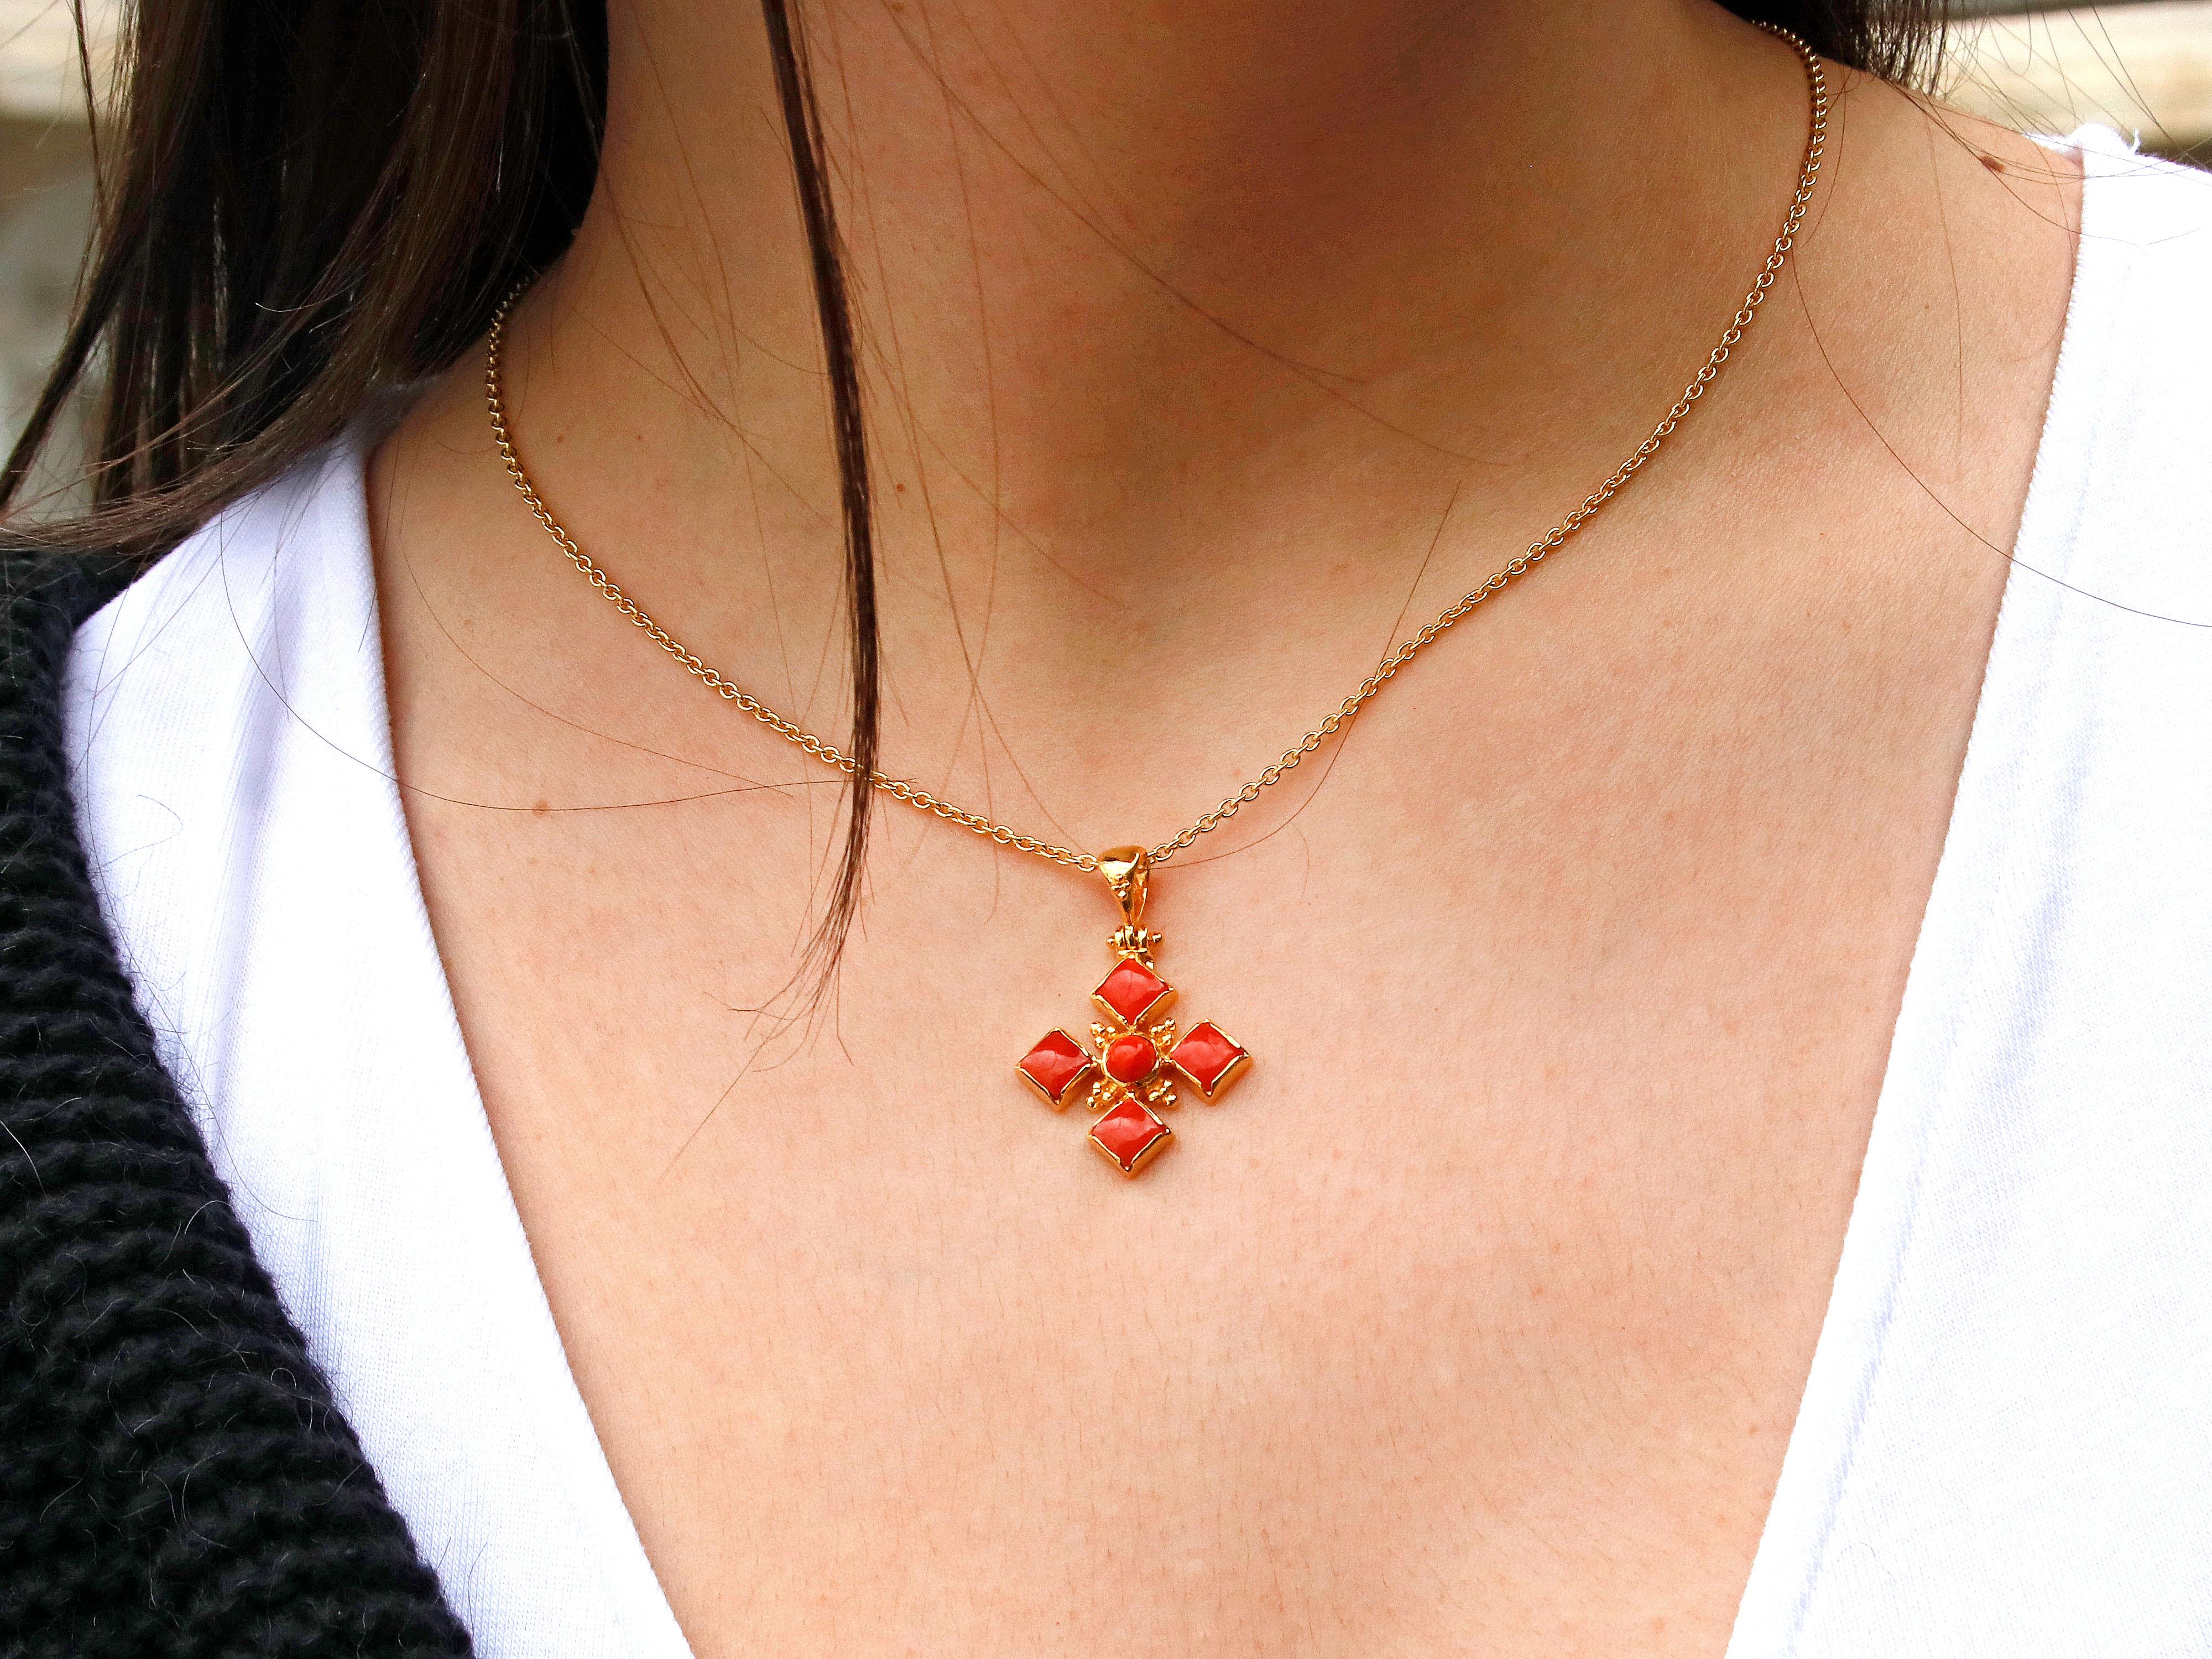 18k gold classic cross completely handmade with coral and granulation decoration. The cross is adorned with coral, which adds a pop of color to the piece. Coral is a natural gemstone and it is often associated with love, passion, and protection.